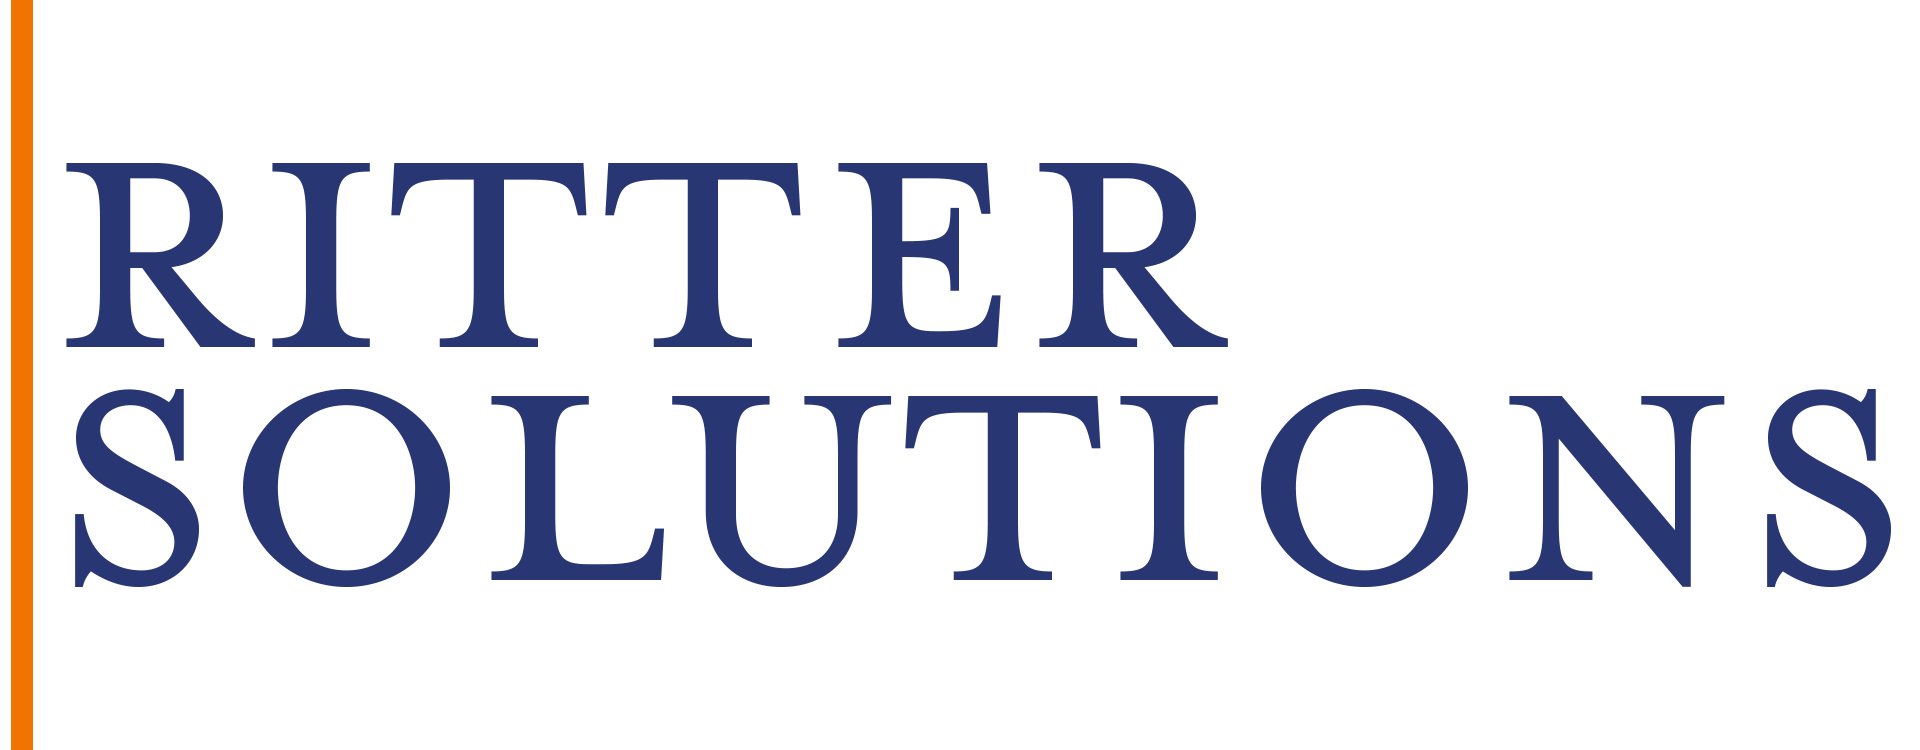 ritter.solutions